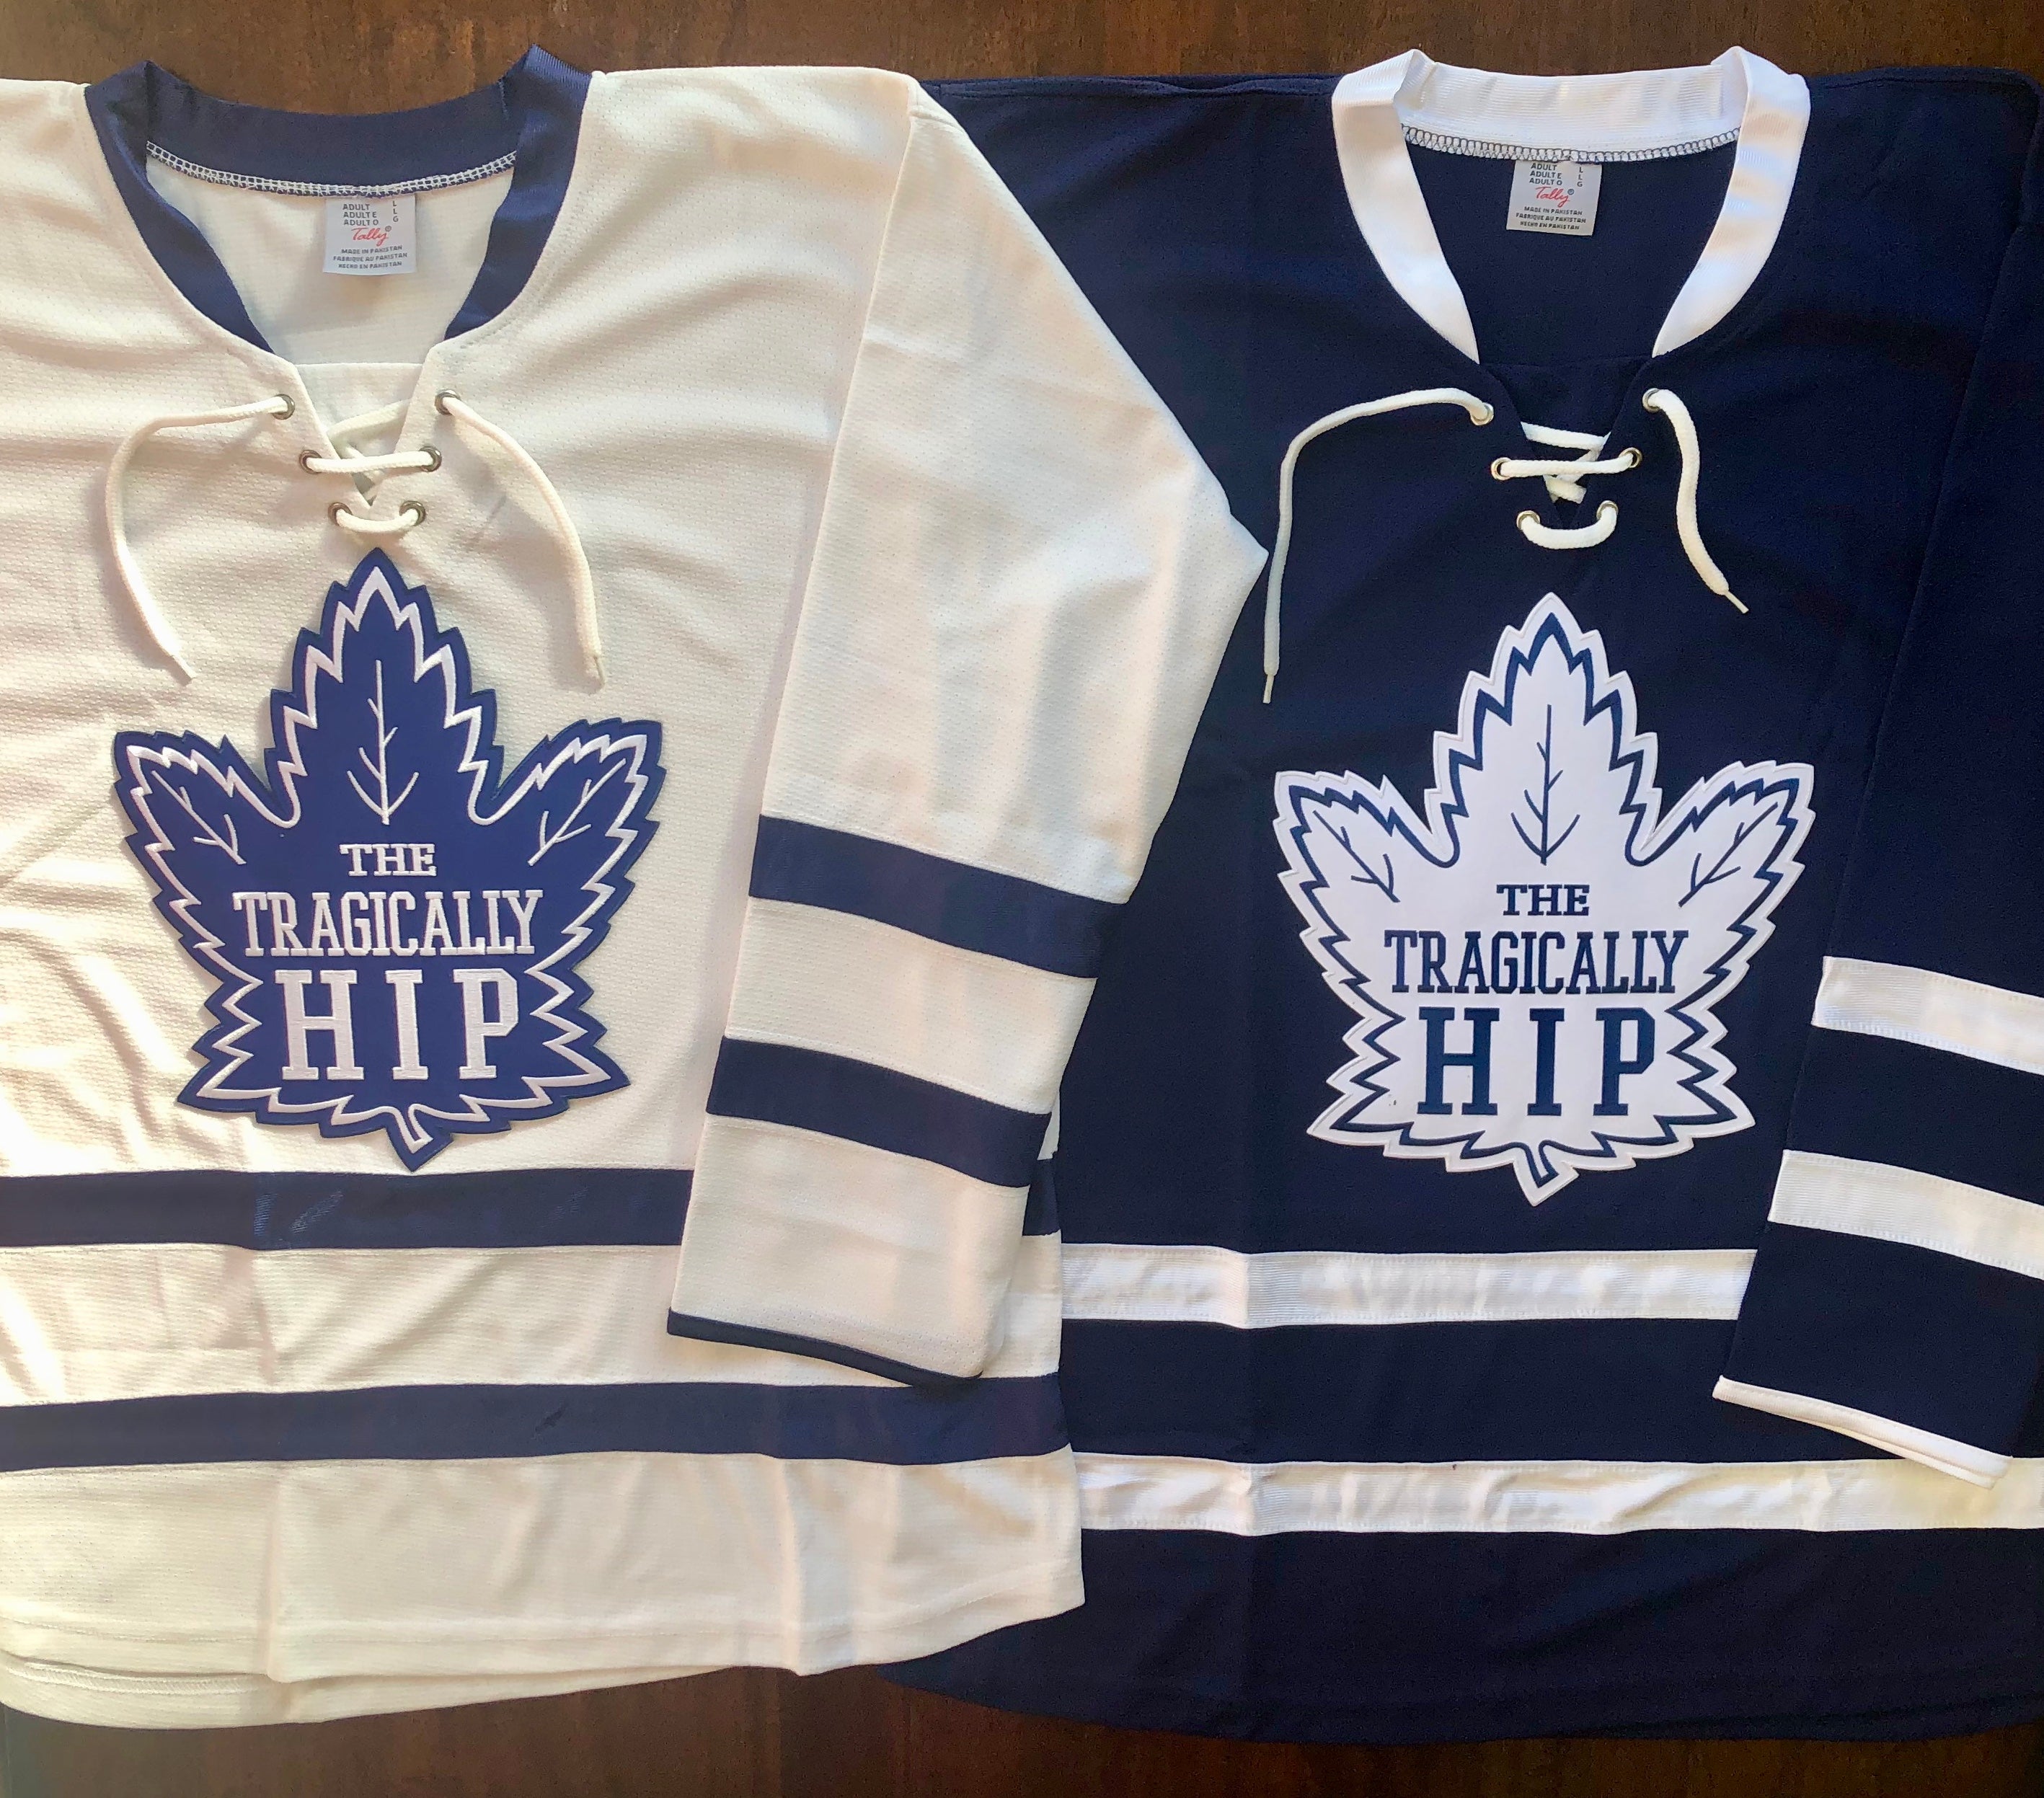  Tally Knights Hockey Jerseys - We Customize with Your